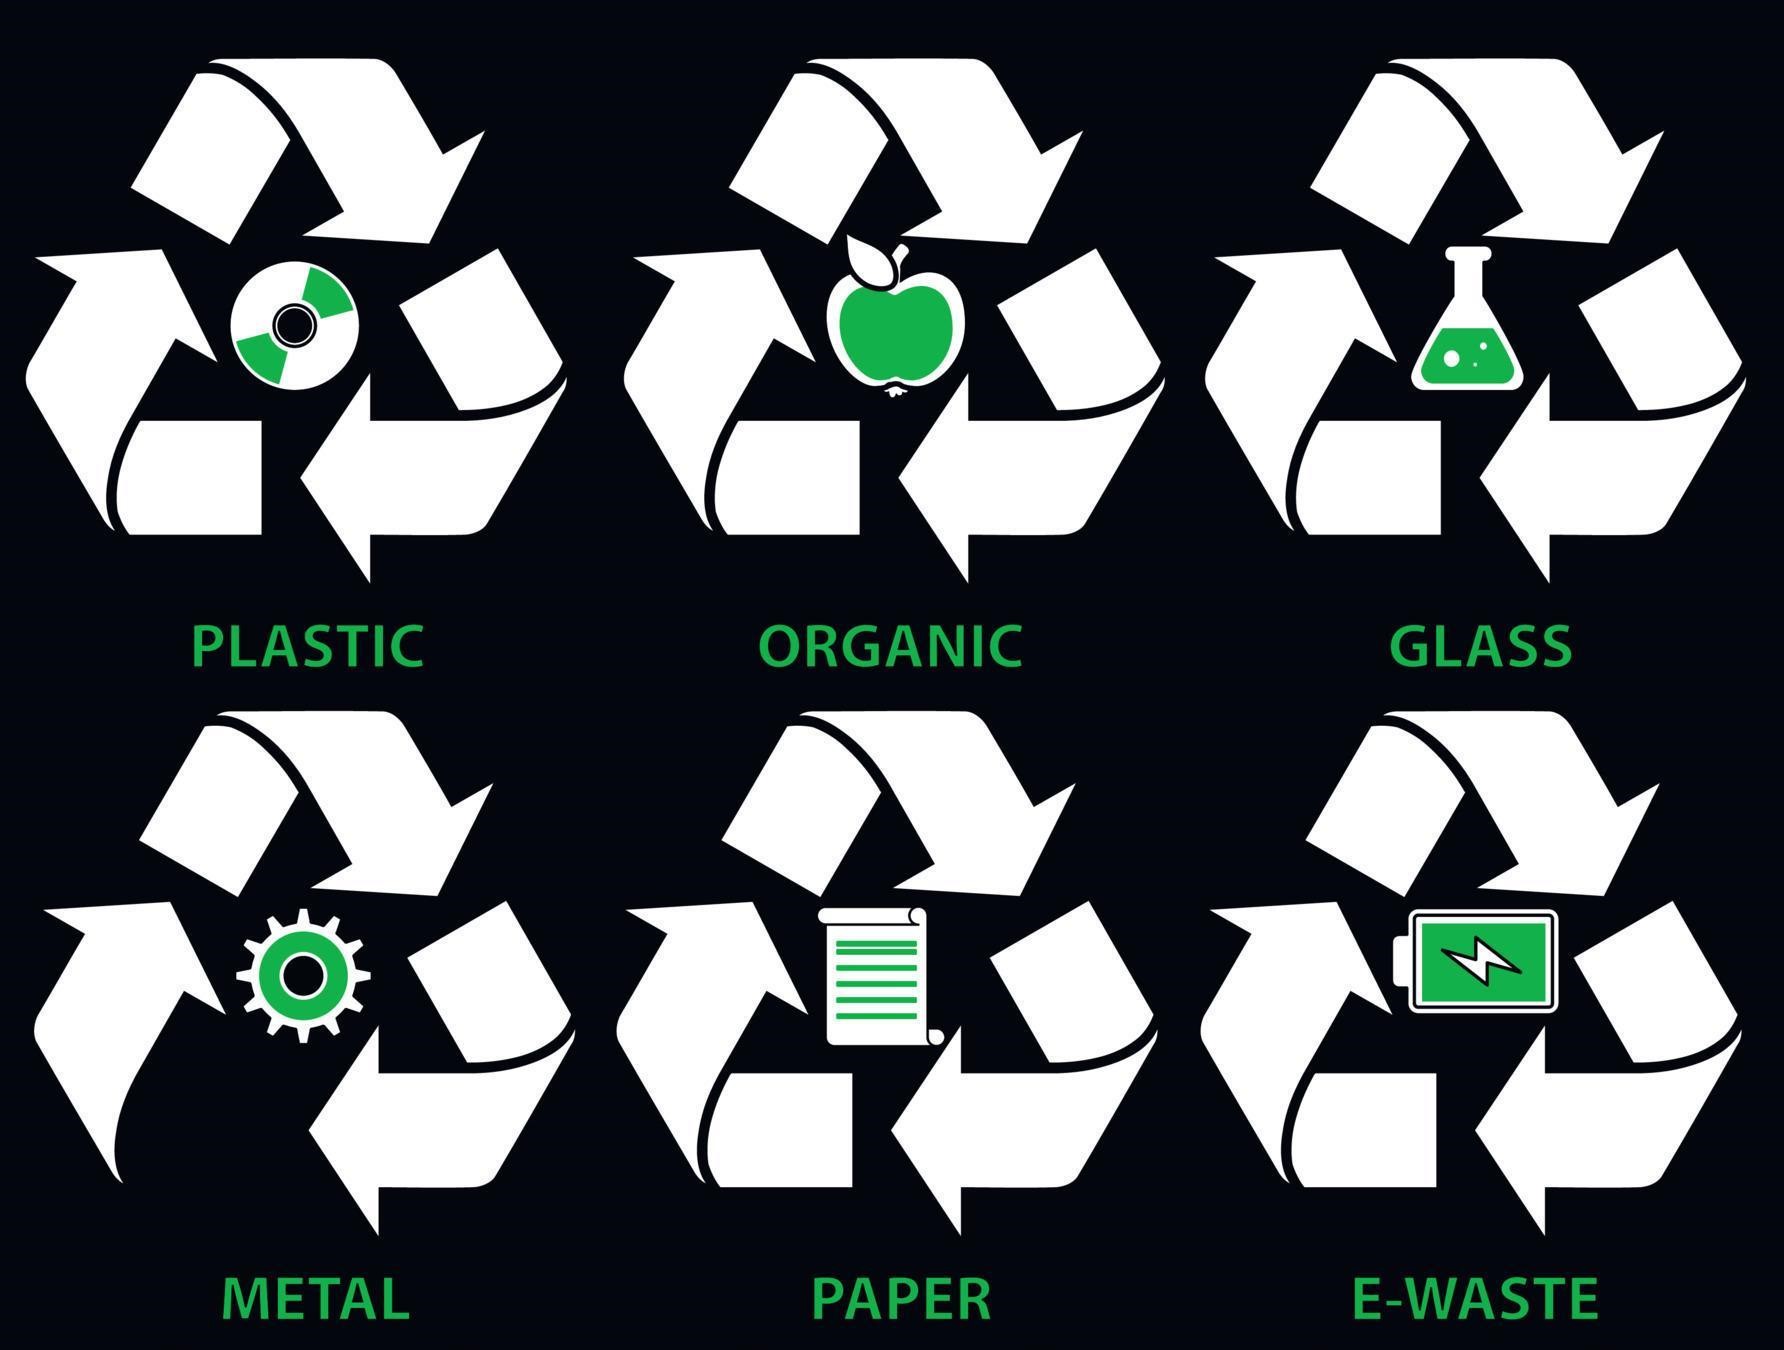 trash-can-icons-with-different-types-of-garbage-organic-plastic-metal-paper-glass-e-waste-in-flat-style-isolated-on-black-background-for-garbage-sorting-and-segregation-vector